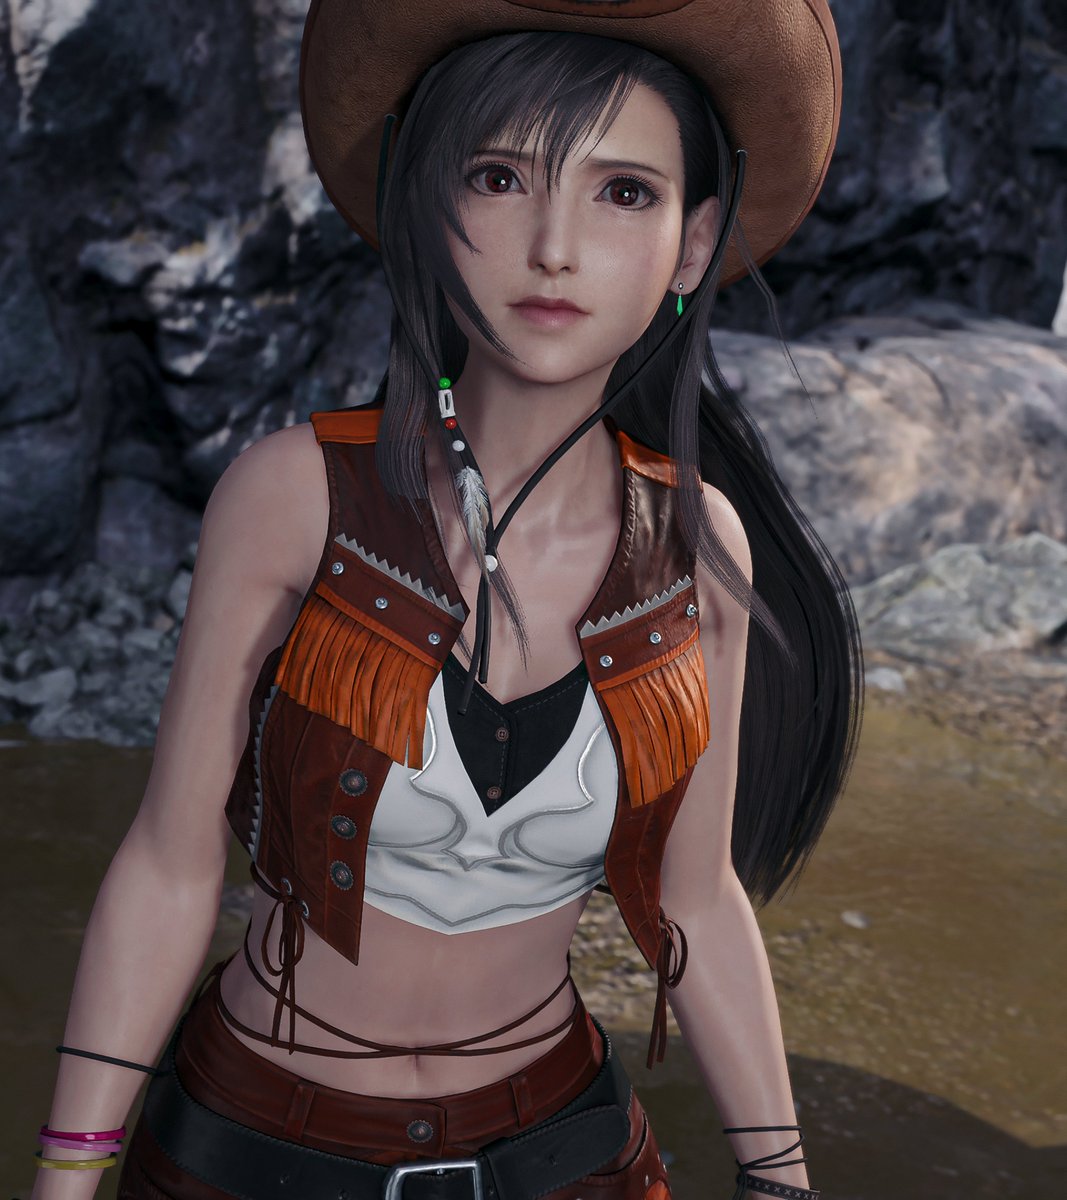 sudden influx of yeehaw tifa on the tl detected
must contribute